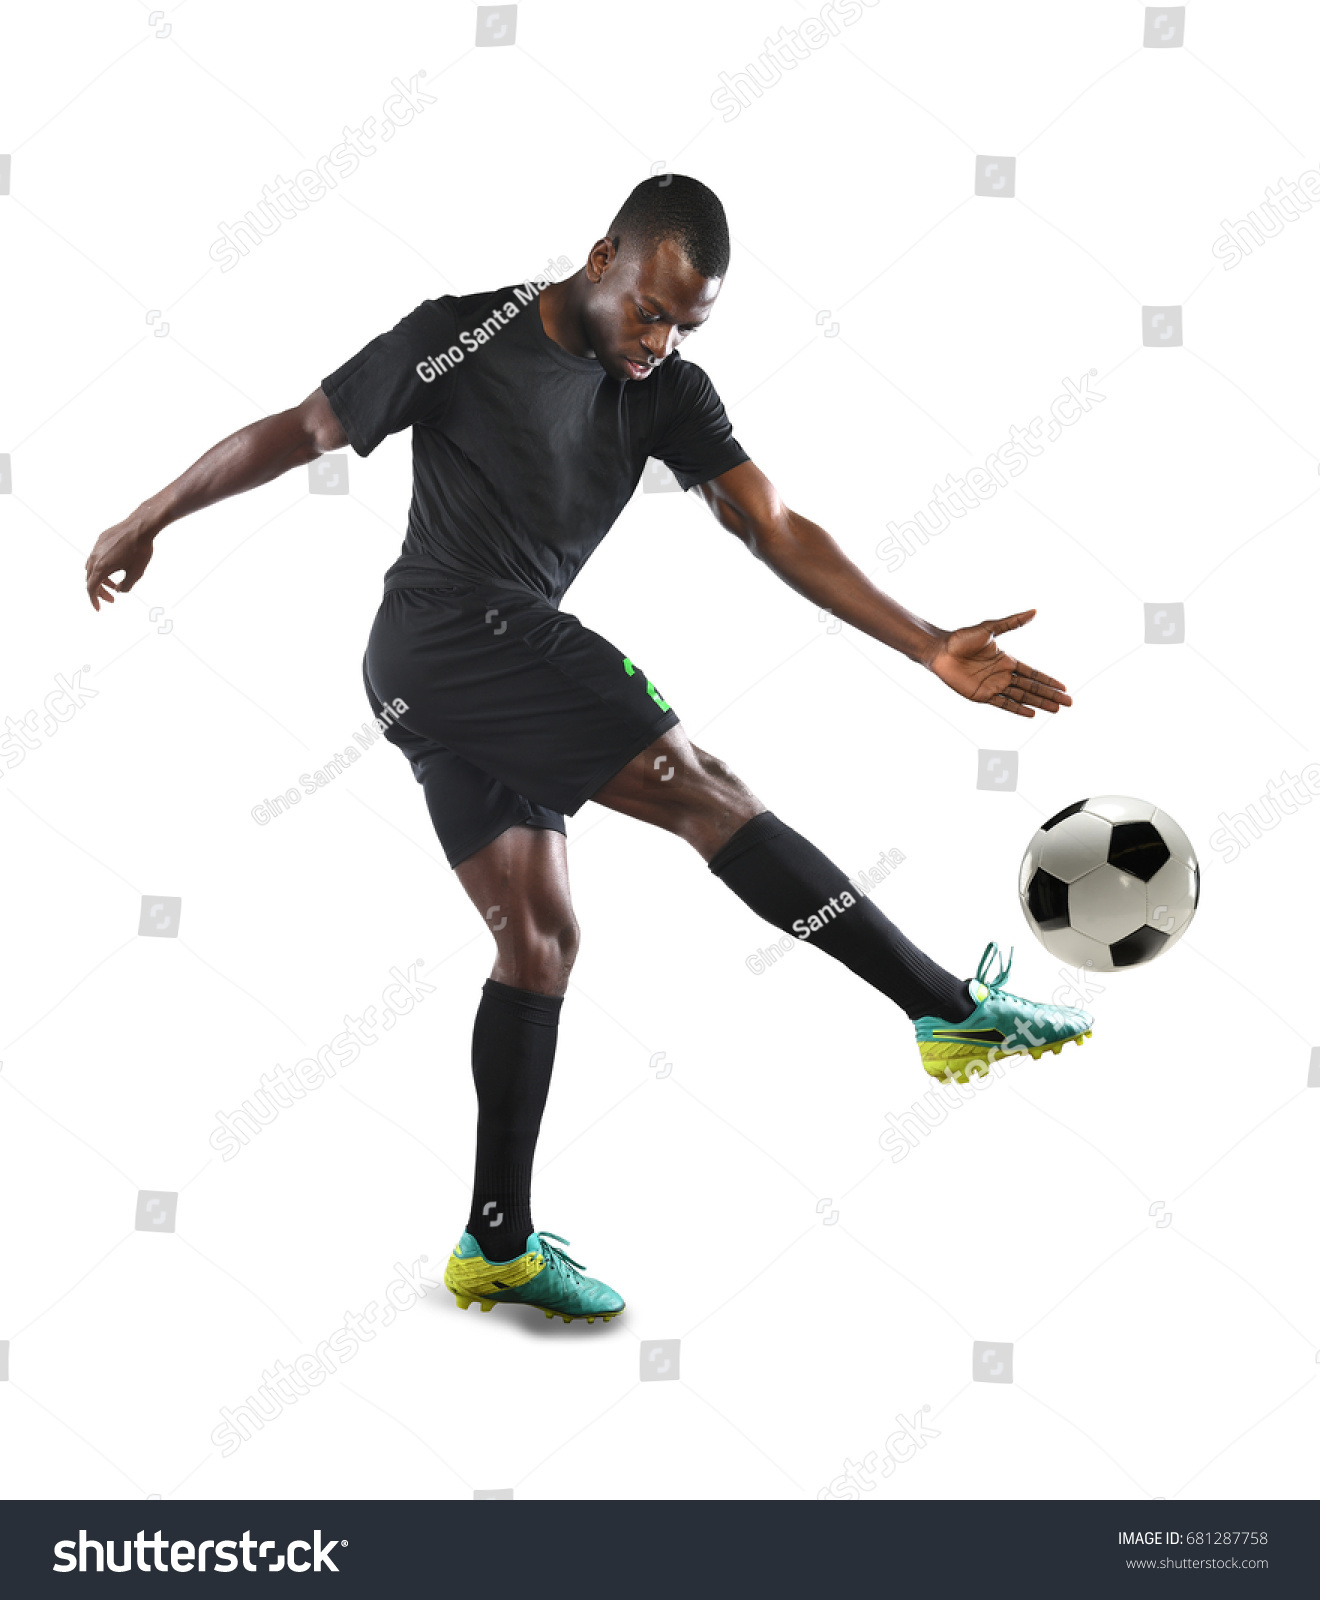 Young African American Soccer Player Kicking Stock Photo 681287758 ...